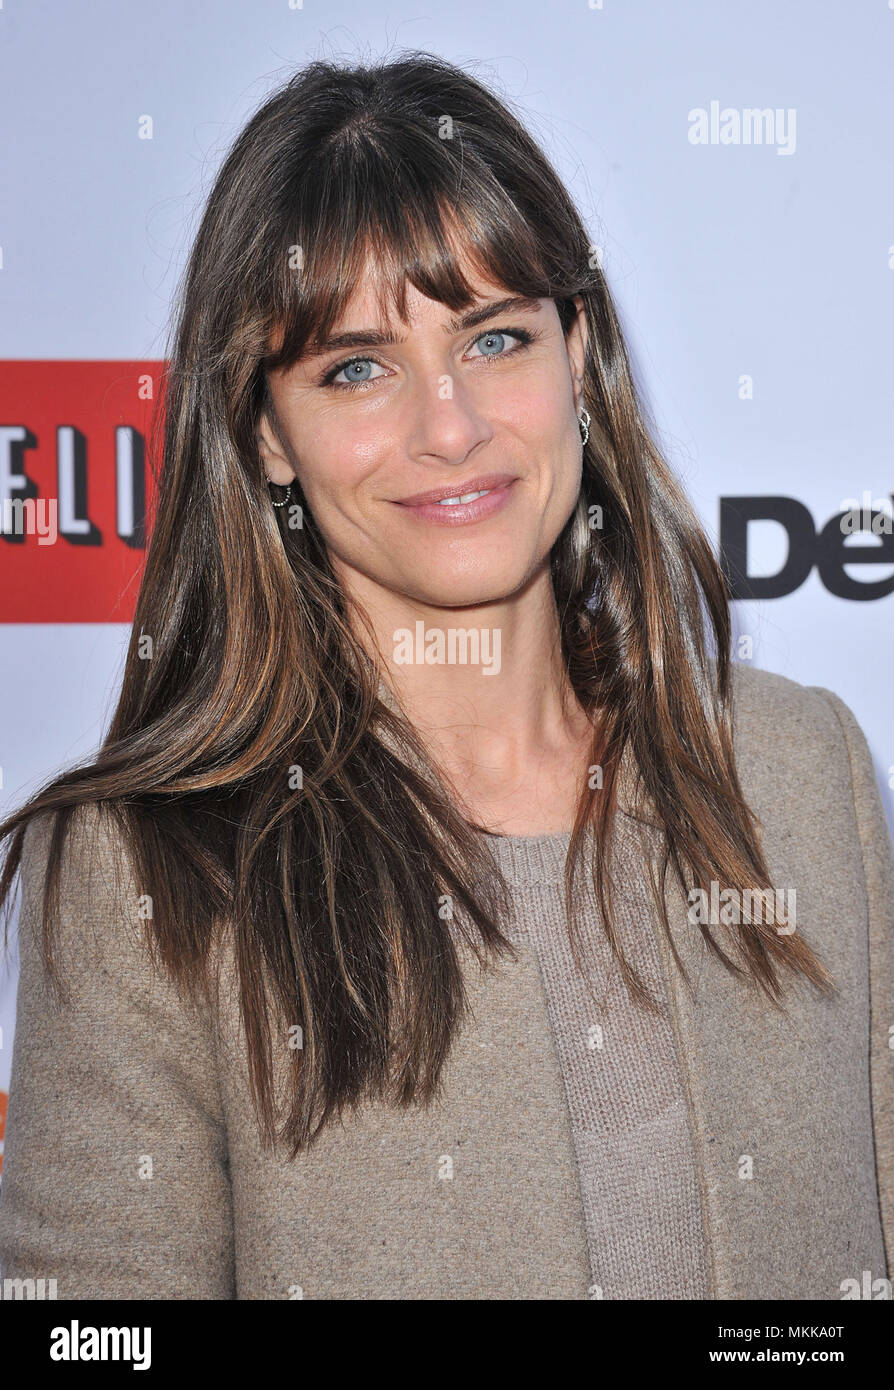 Amanda Peet  arriving at the Arrested Development Premiere at the TCL Chinese Theatre In Los Angeles.Amanda Peet 145 Red Carpet Event, Vertical, USA, Film Industry, Celebrities,  Photography, Bestof, Arts Culture and Entertainment, Topix Celebrities fashion /  Vertical, Best of, Event in Hollywood Life - California,  Red Carpet and backstage, USA, Film Industry, Celebrities,  movie celebrities, TV celebrities, Music celebrities, Photography, Bestof, Arts Culture and Entertainment,  Topix, headshot, vertical, one person,, from the year , 2013, inquiry tsuni@Gamma-USA.com Stock Photo